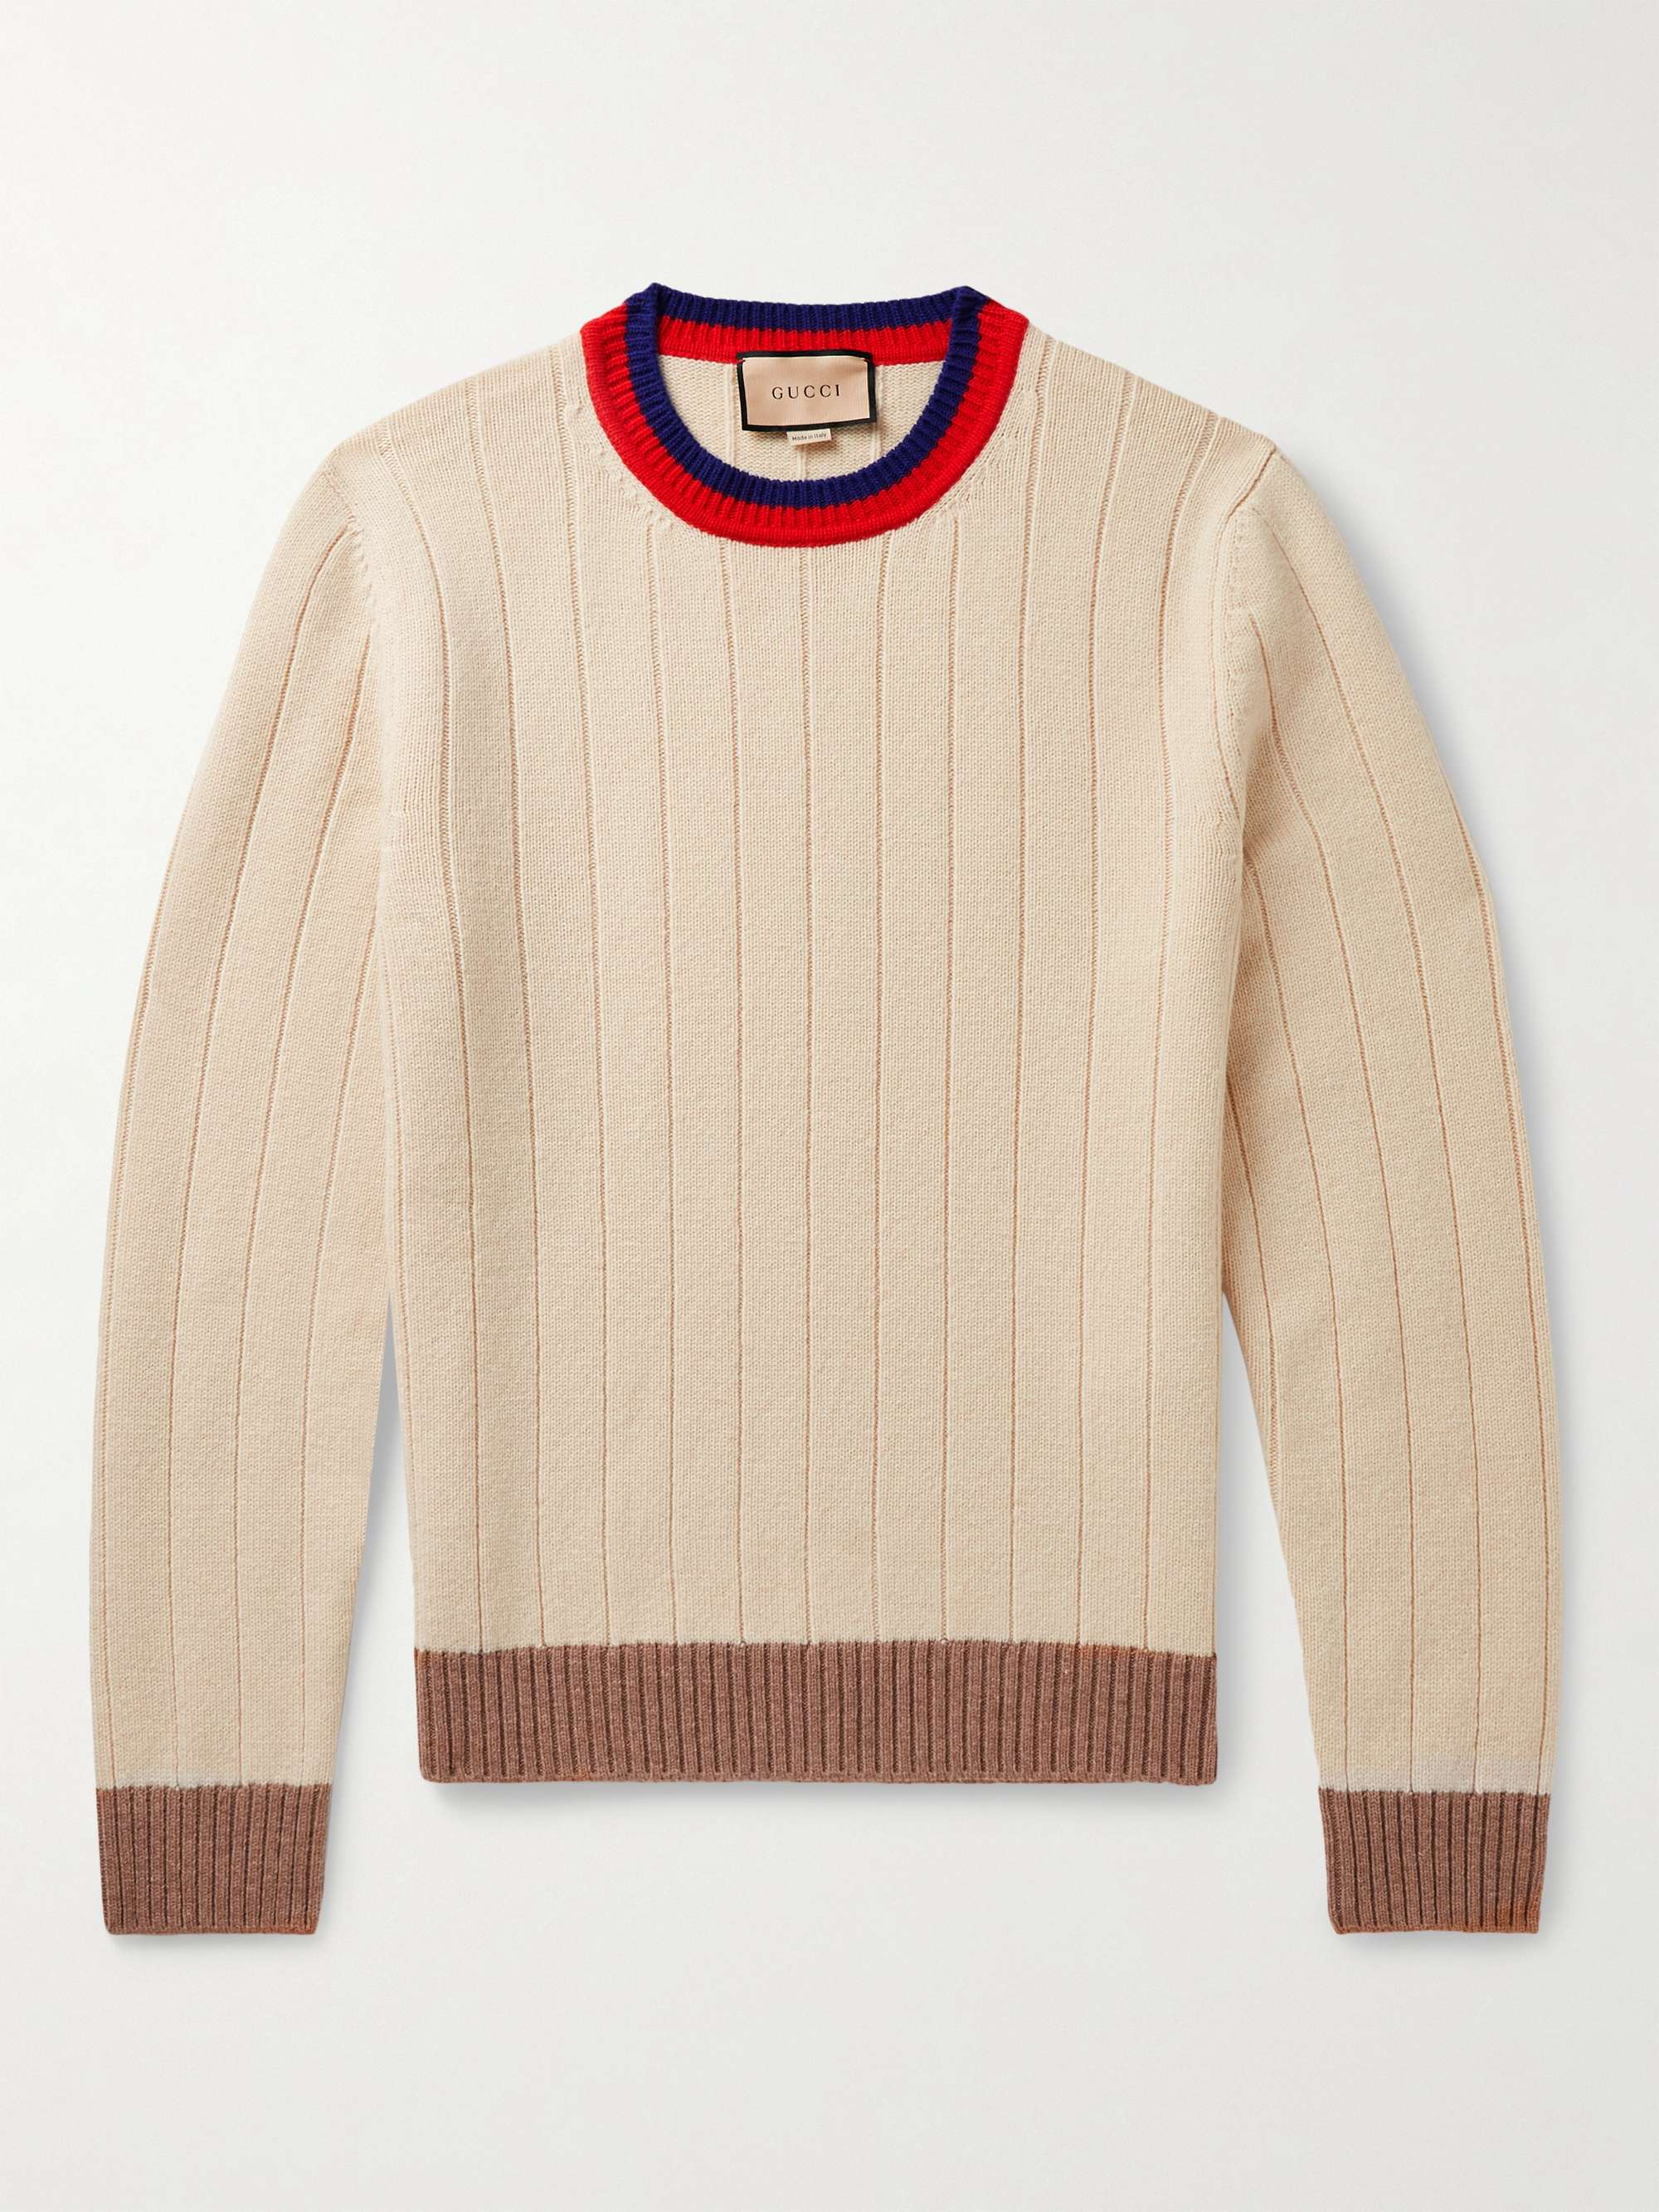 GUCCI Striped Ribbed Wool Sweater for Men | MR PORTER